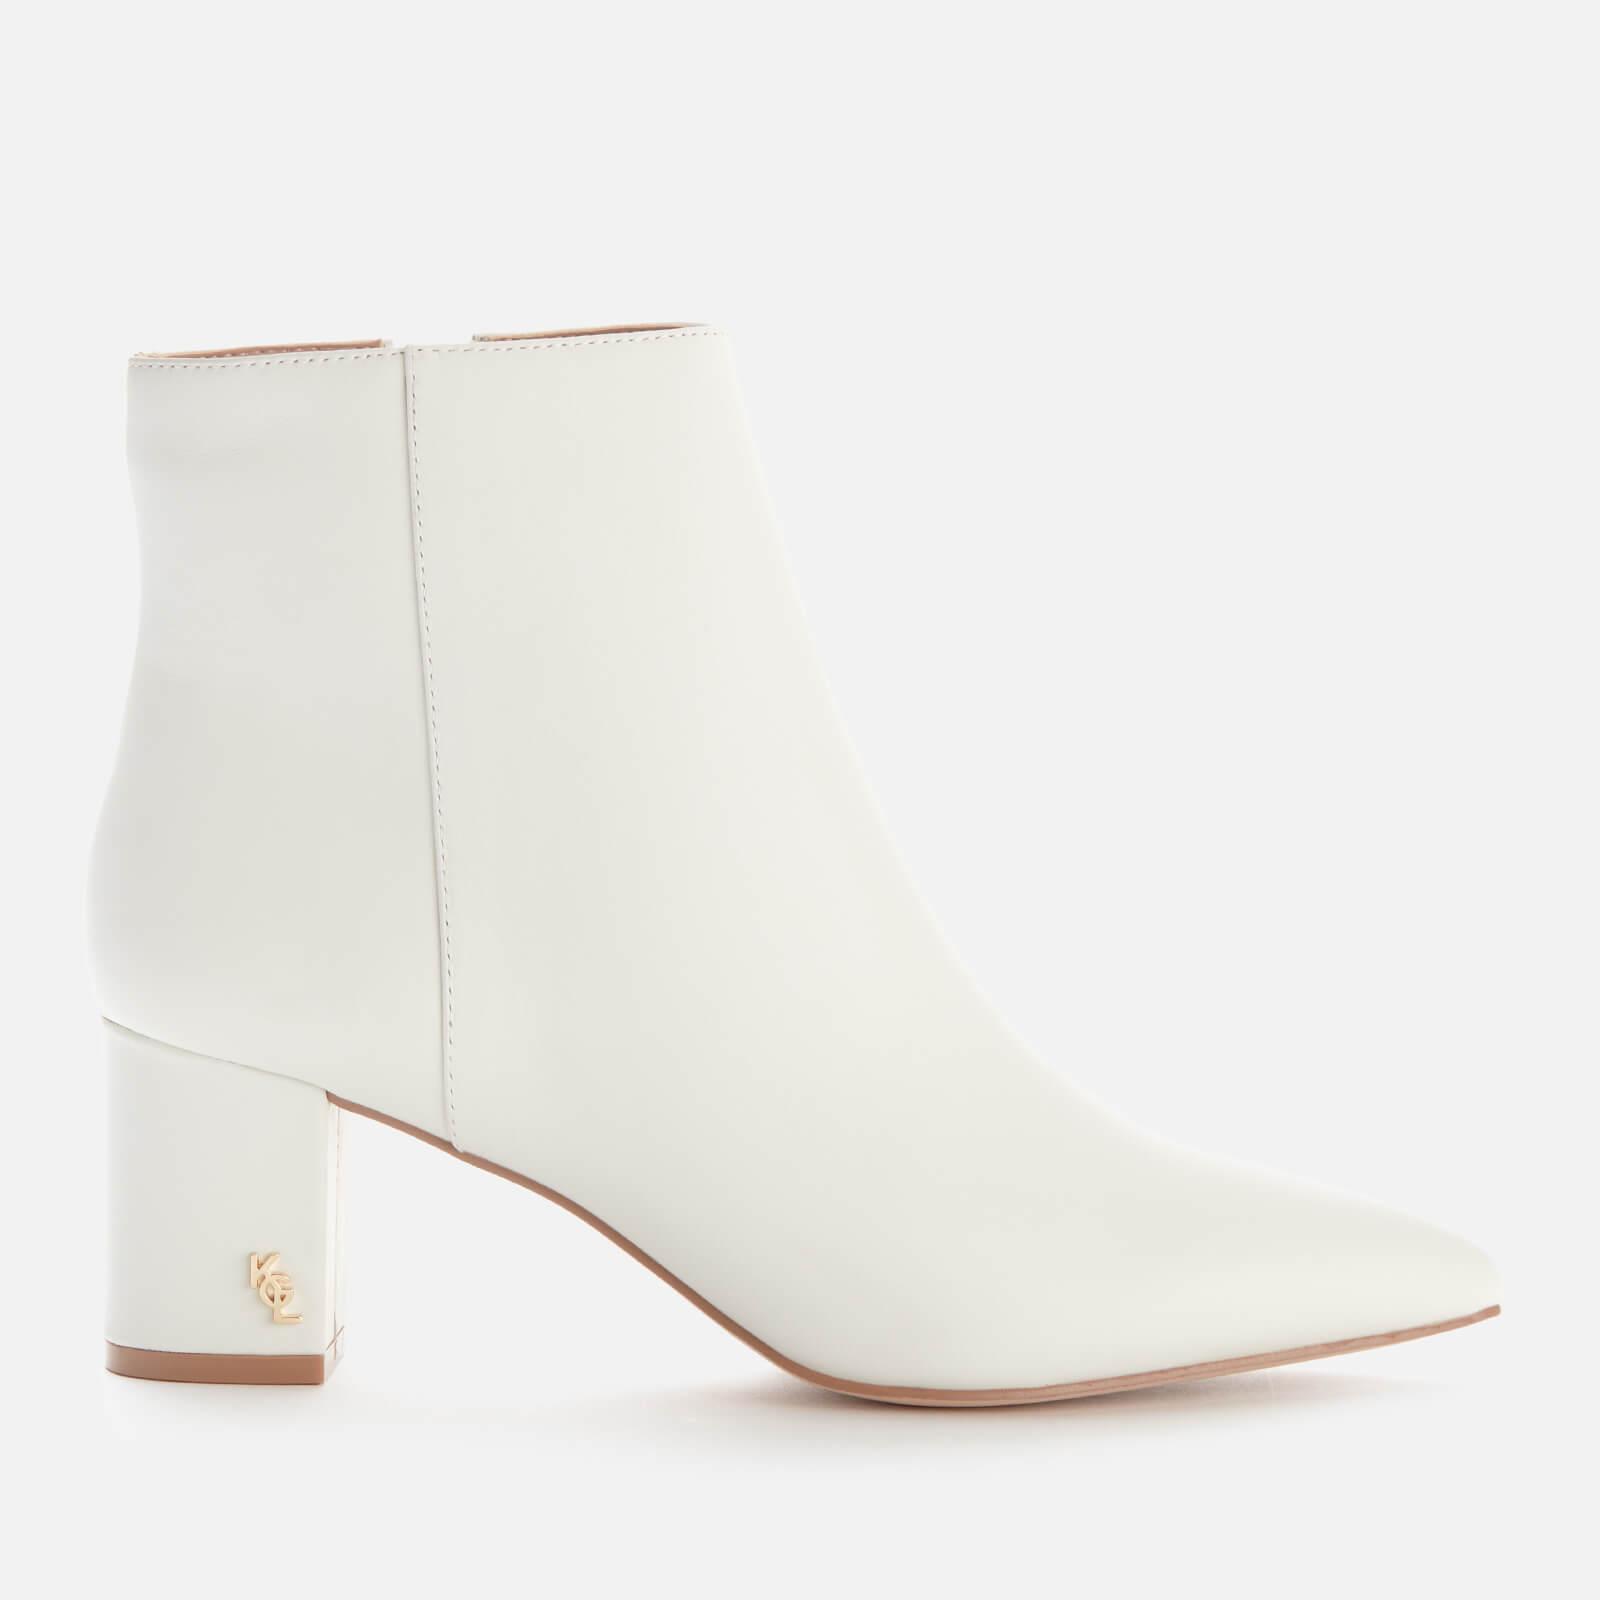 Kurt Geiger Burlington Leather Heeled Ankle Boots in White - Lyst